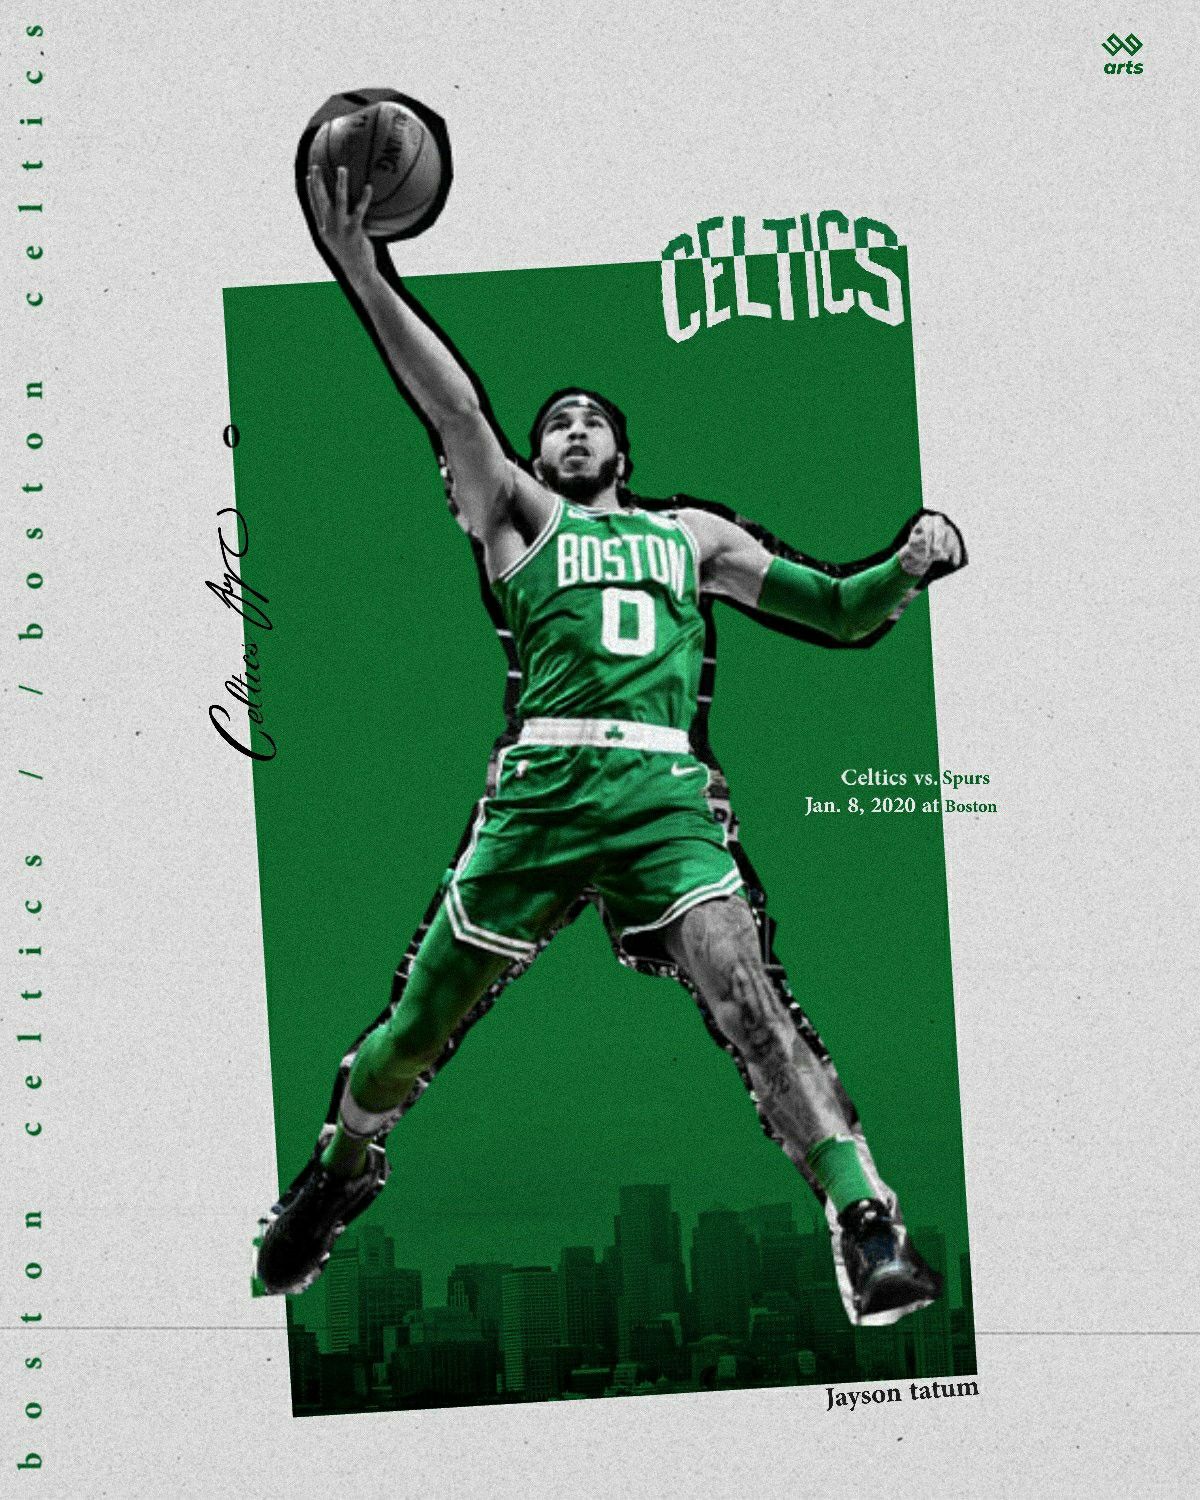 HoopsWallpaperscom  Get the latest HD and mobile NBA wallpapers today   Blog Archive 2022 NBA Finals Golden State Warriors vs Boston Celtics  wallpaper  HoopsWallpaperscom  Get the latest HD and